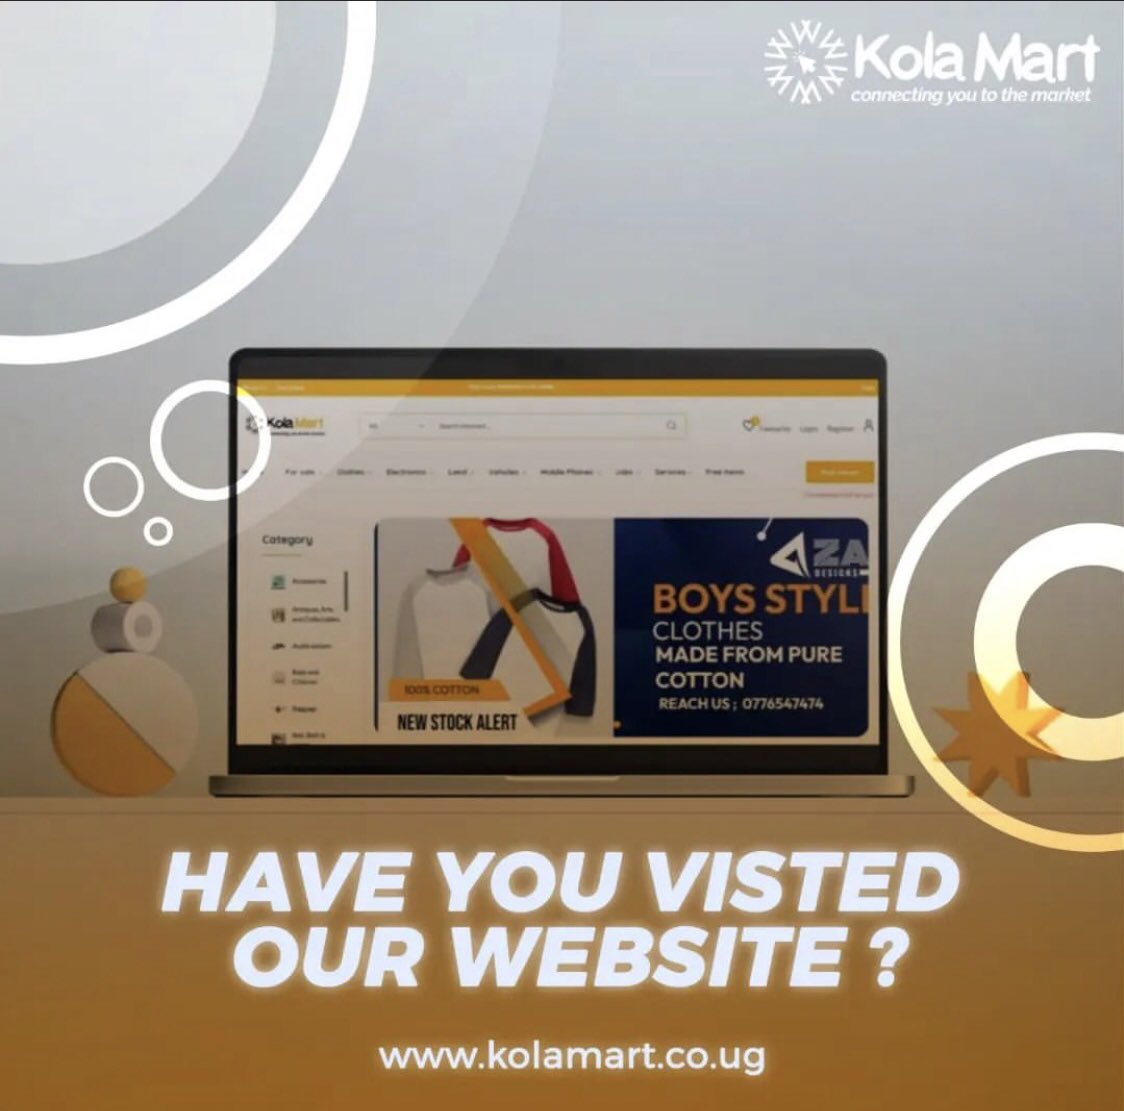 Why wait? Register now and unlock the door to endless possibilities. Let’s make your online business dreams a reality together! #SellOnline #Kolamart #OnlineMarketplace 💻🚀